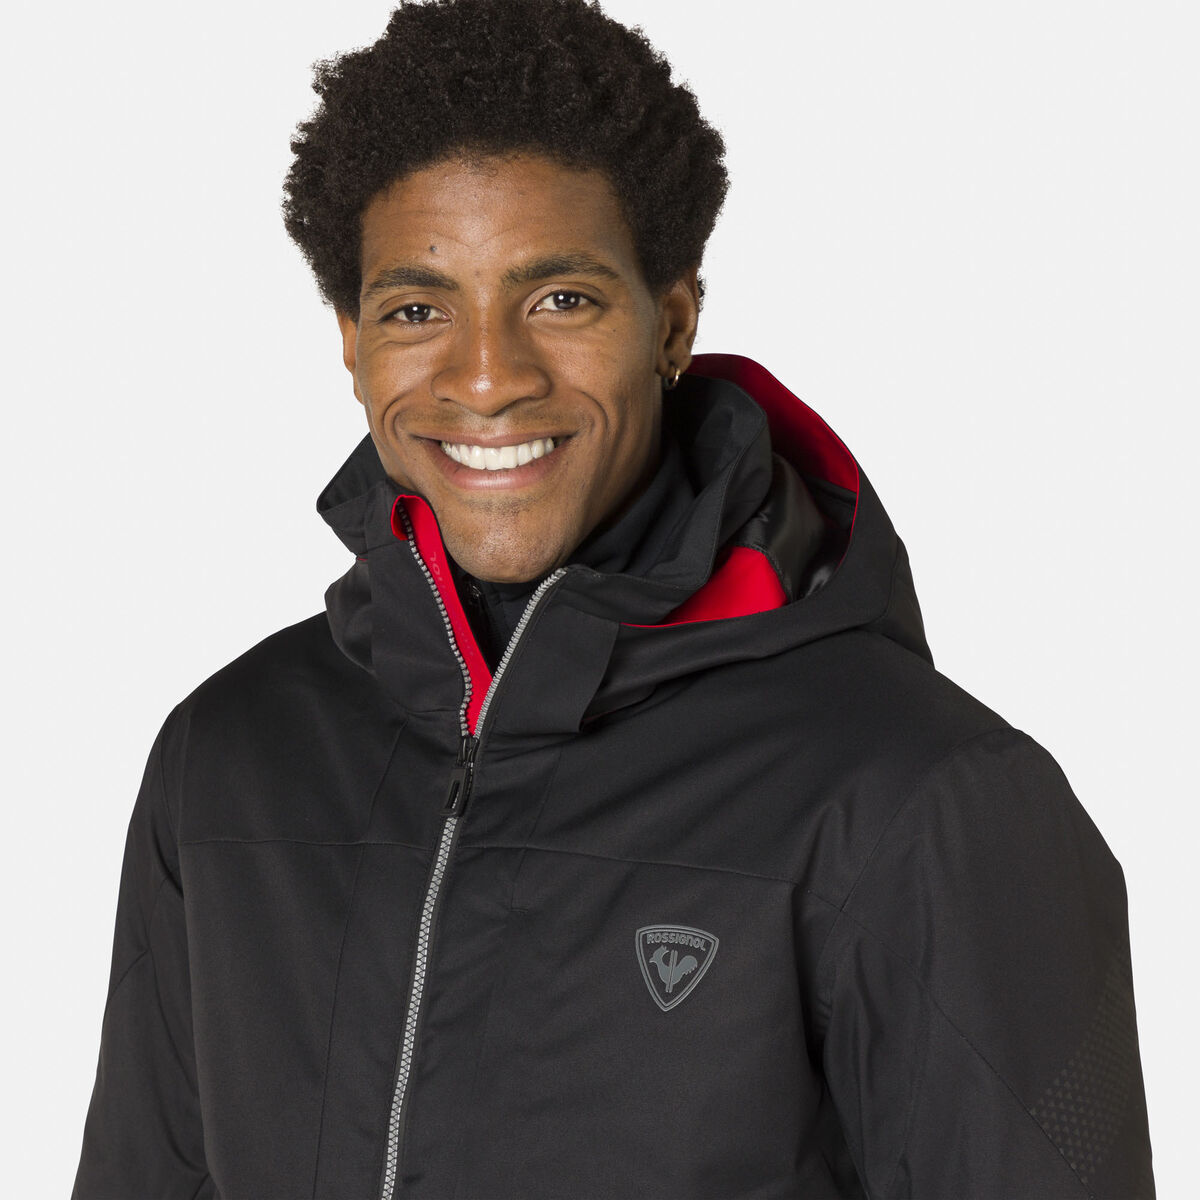 Rossignol Manteau Hero All Speed Homme – Oberson